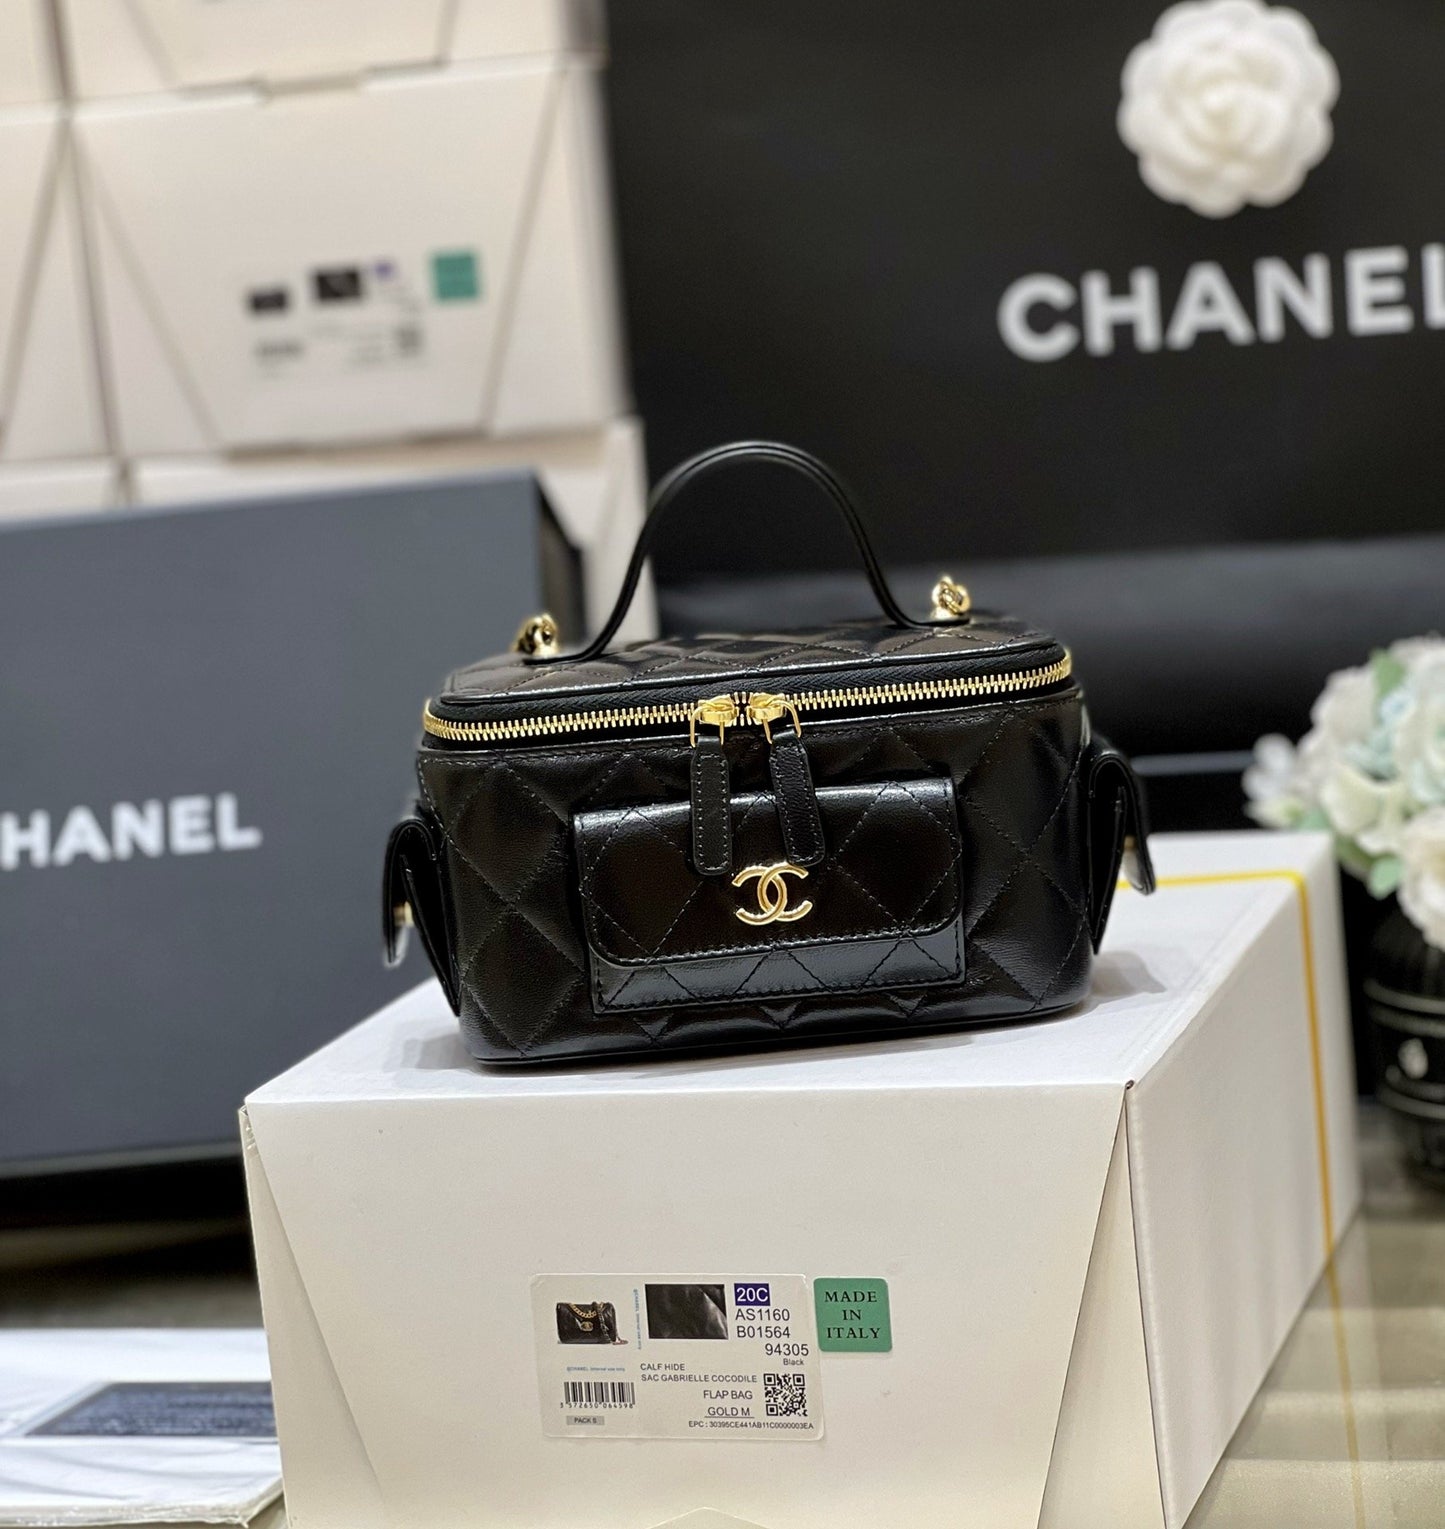 ChanelVanity Bag With Strap Black For Women, Women&#8217;s Bags 6.6in/17cm AP3017 B09208 94305